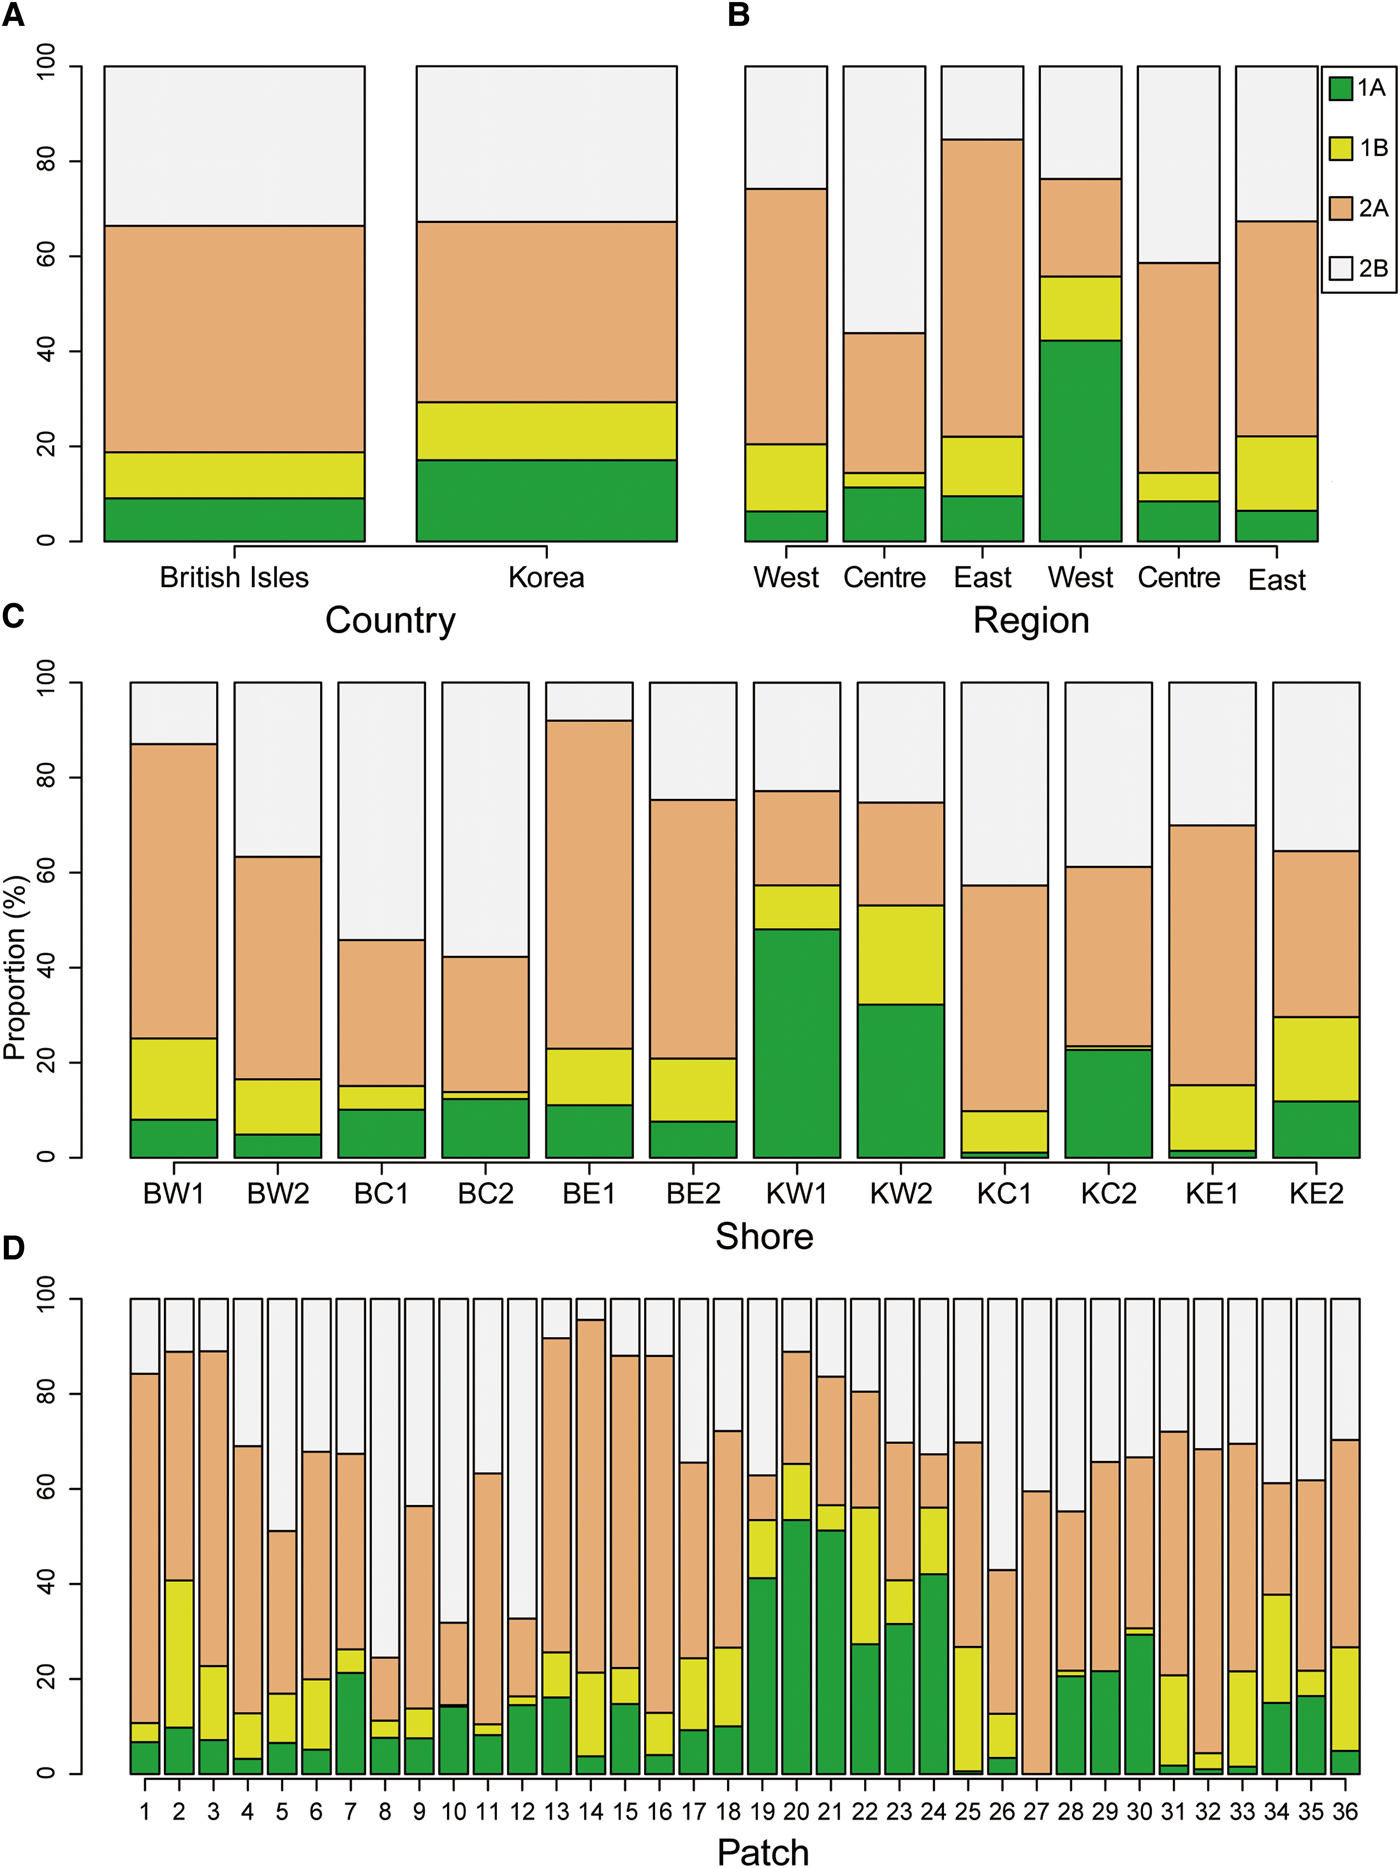 A Comparison Of Epiphytic Nematode Diversity And Assemblages In Corallina Turves On British And South Korean Coasts Across Hierarchical Spatial Scales Journal Of The Marine Biological Association Of The United Kingdom